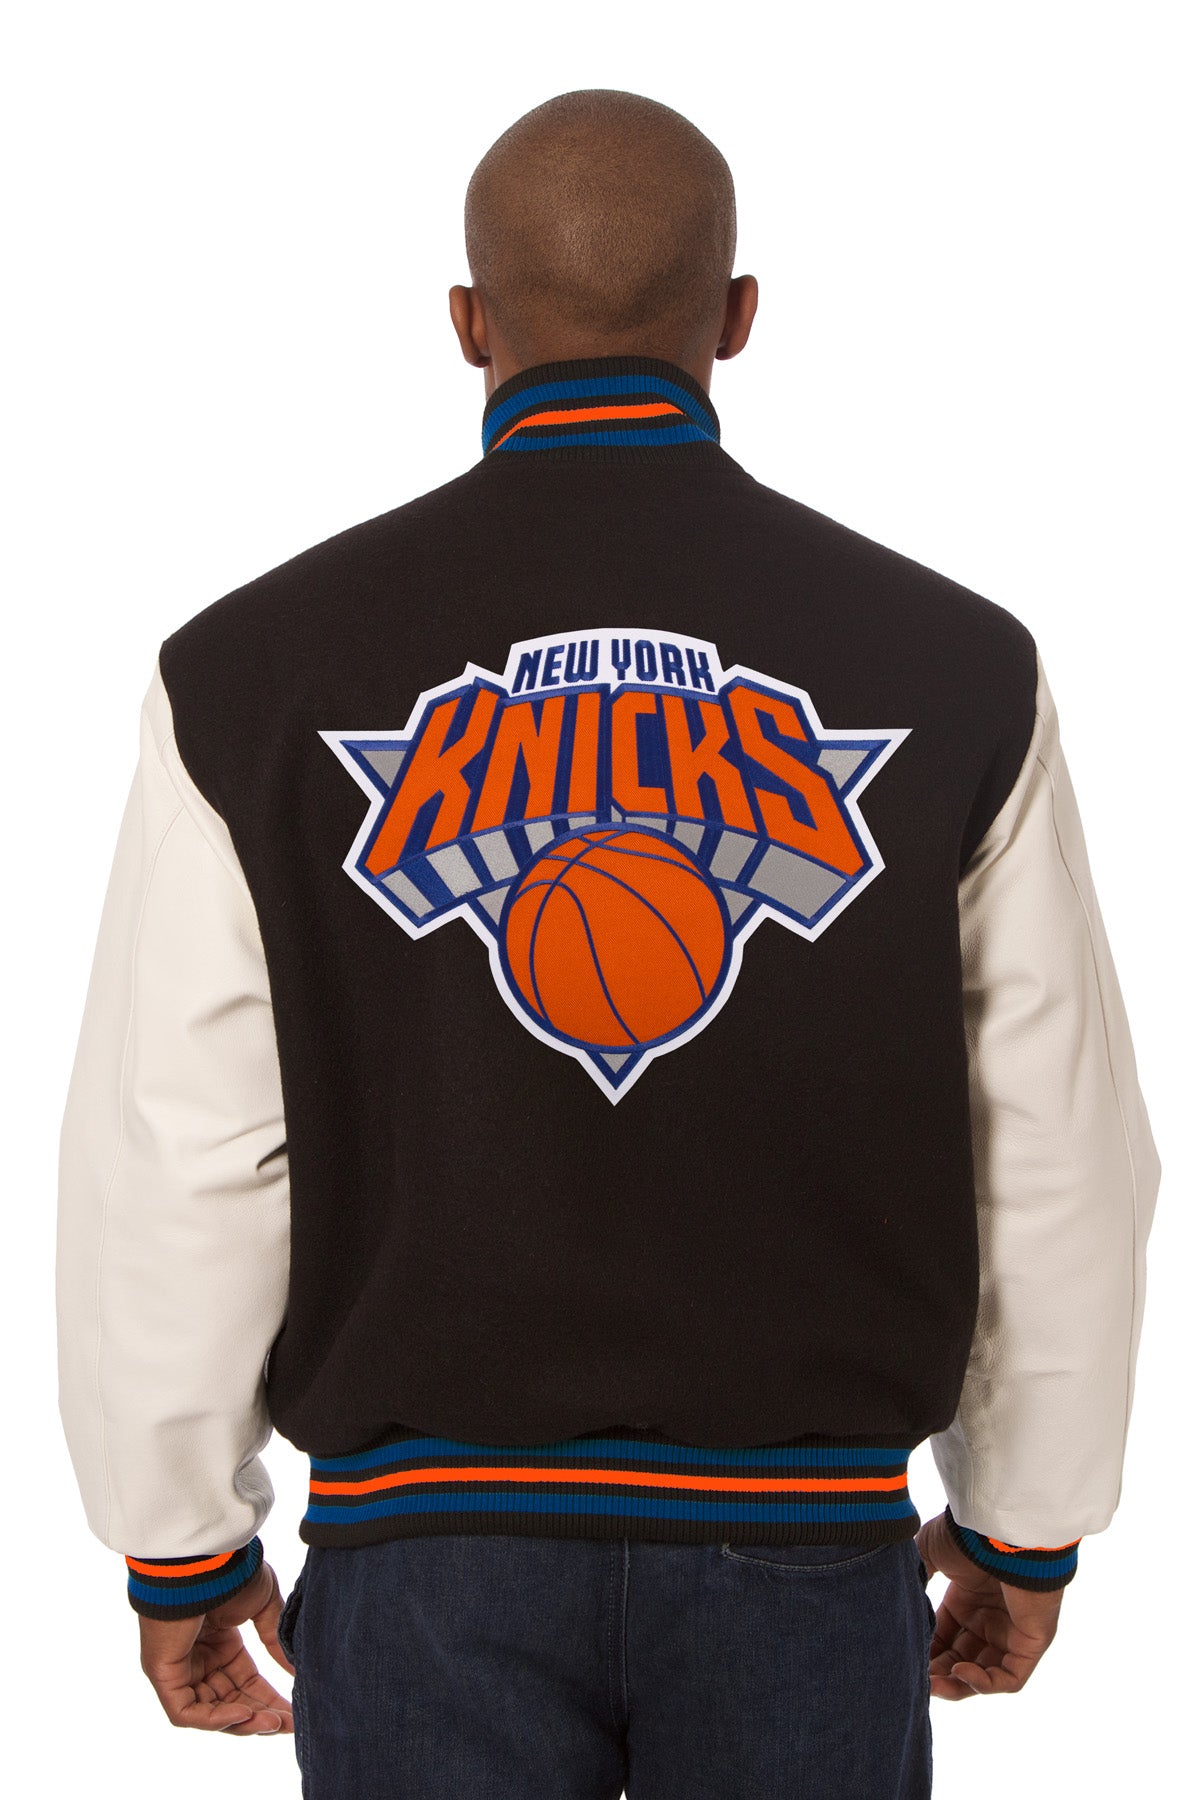 New York Knicks Embroidered Wool and Leather Jacket